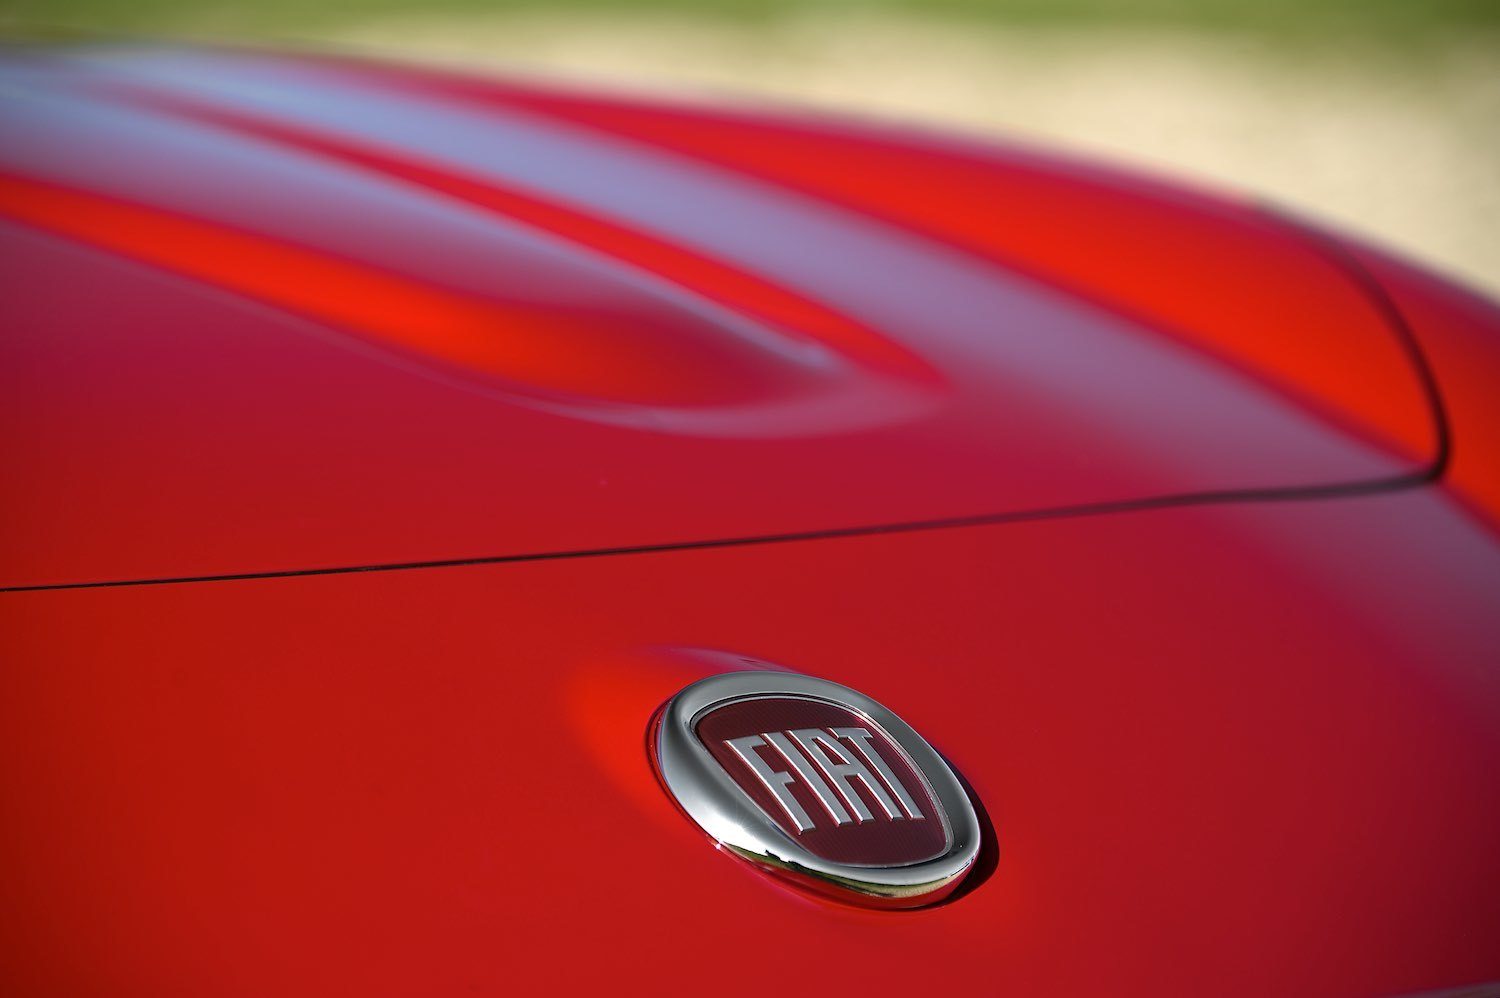 Tom Scanlan reviews the Fiat 124 Spider for Drive 16